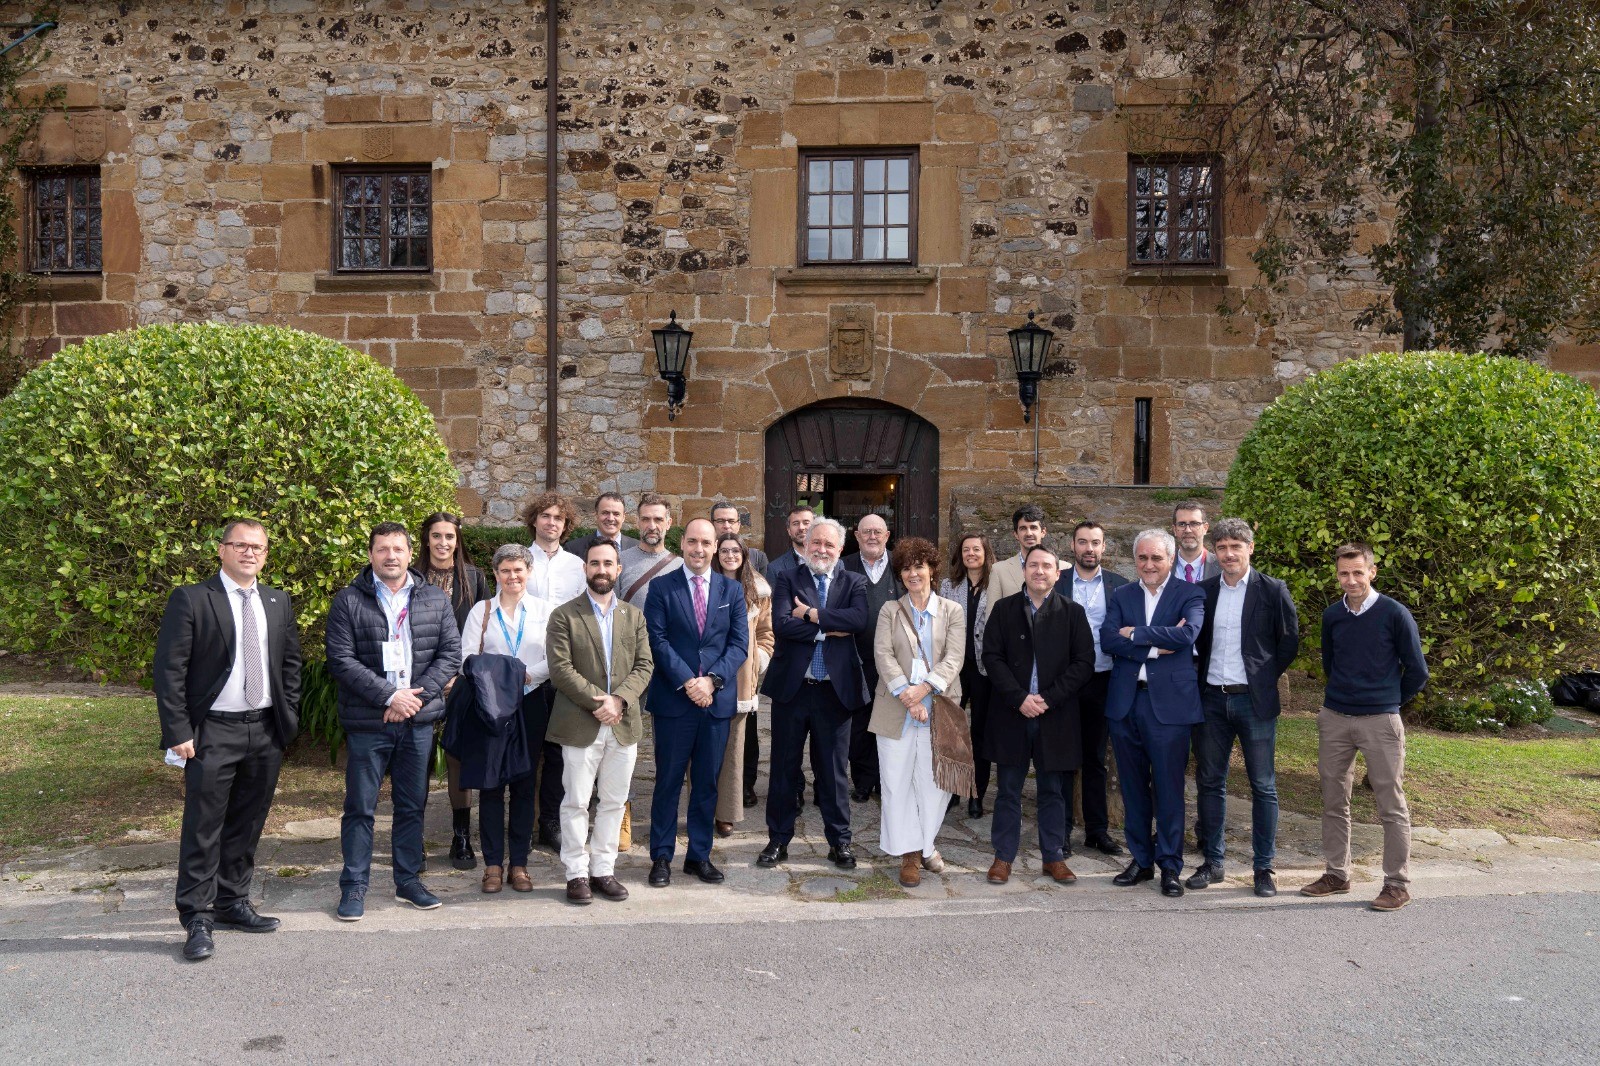 meeting-of-the-heads-of-hydrogen-valleys-in-spain-aragon-hydrogen-foundation